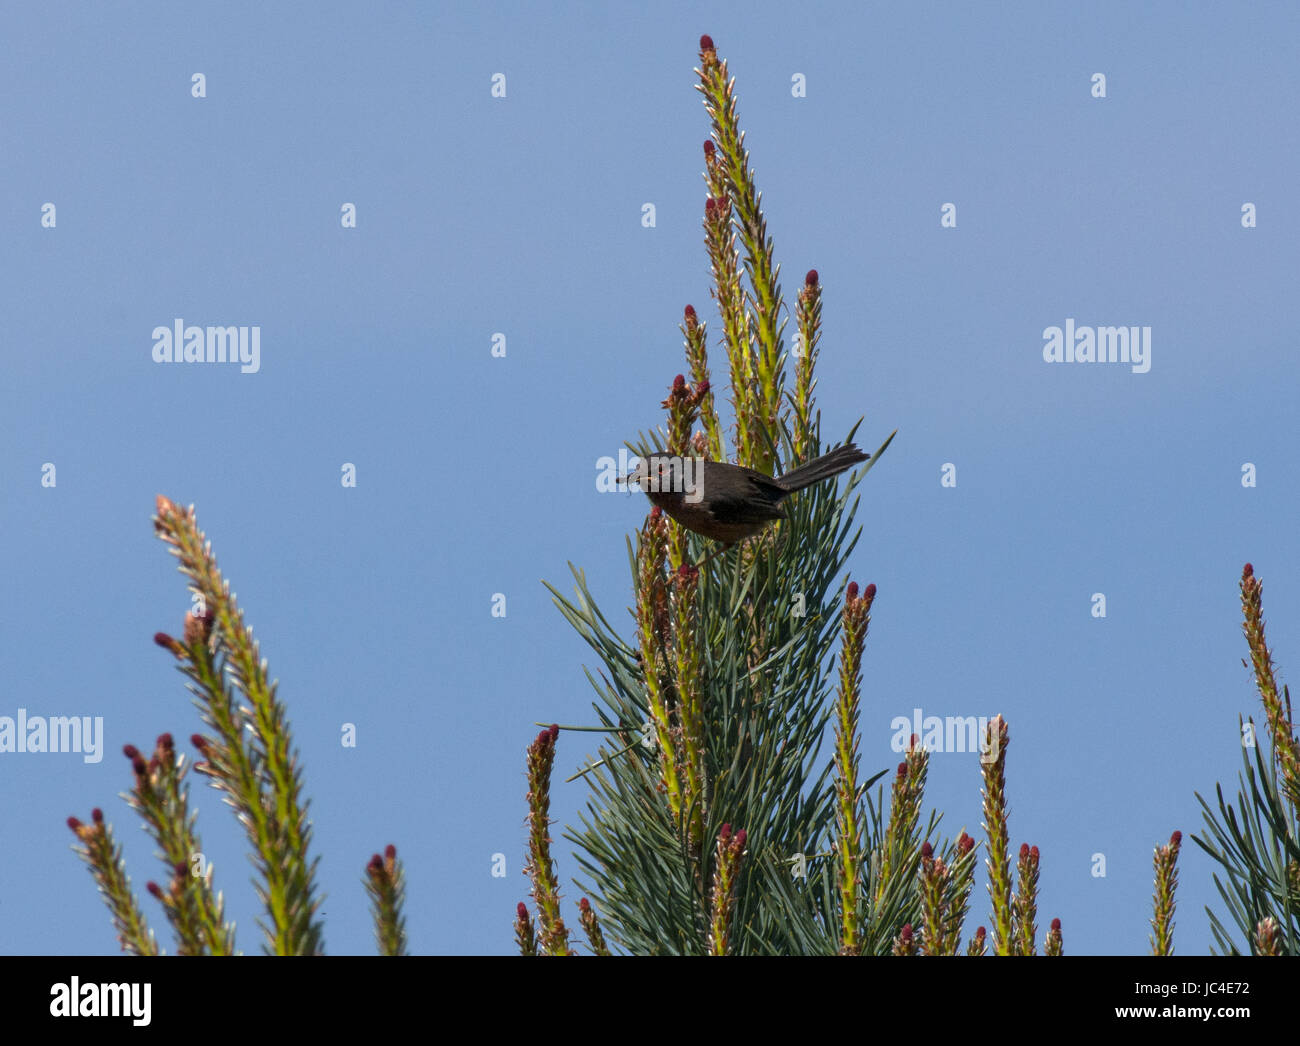 Dartford Warbler, Sylvia undata, with spider prey perched on pine tree with clear blue sky background in Dorset, UK Stock Photo